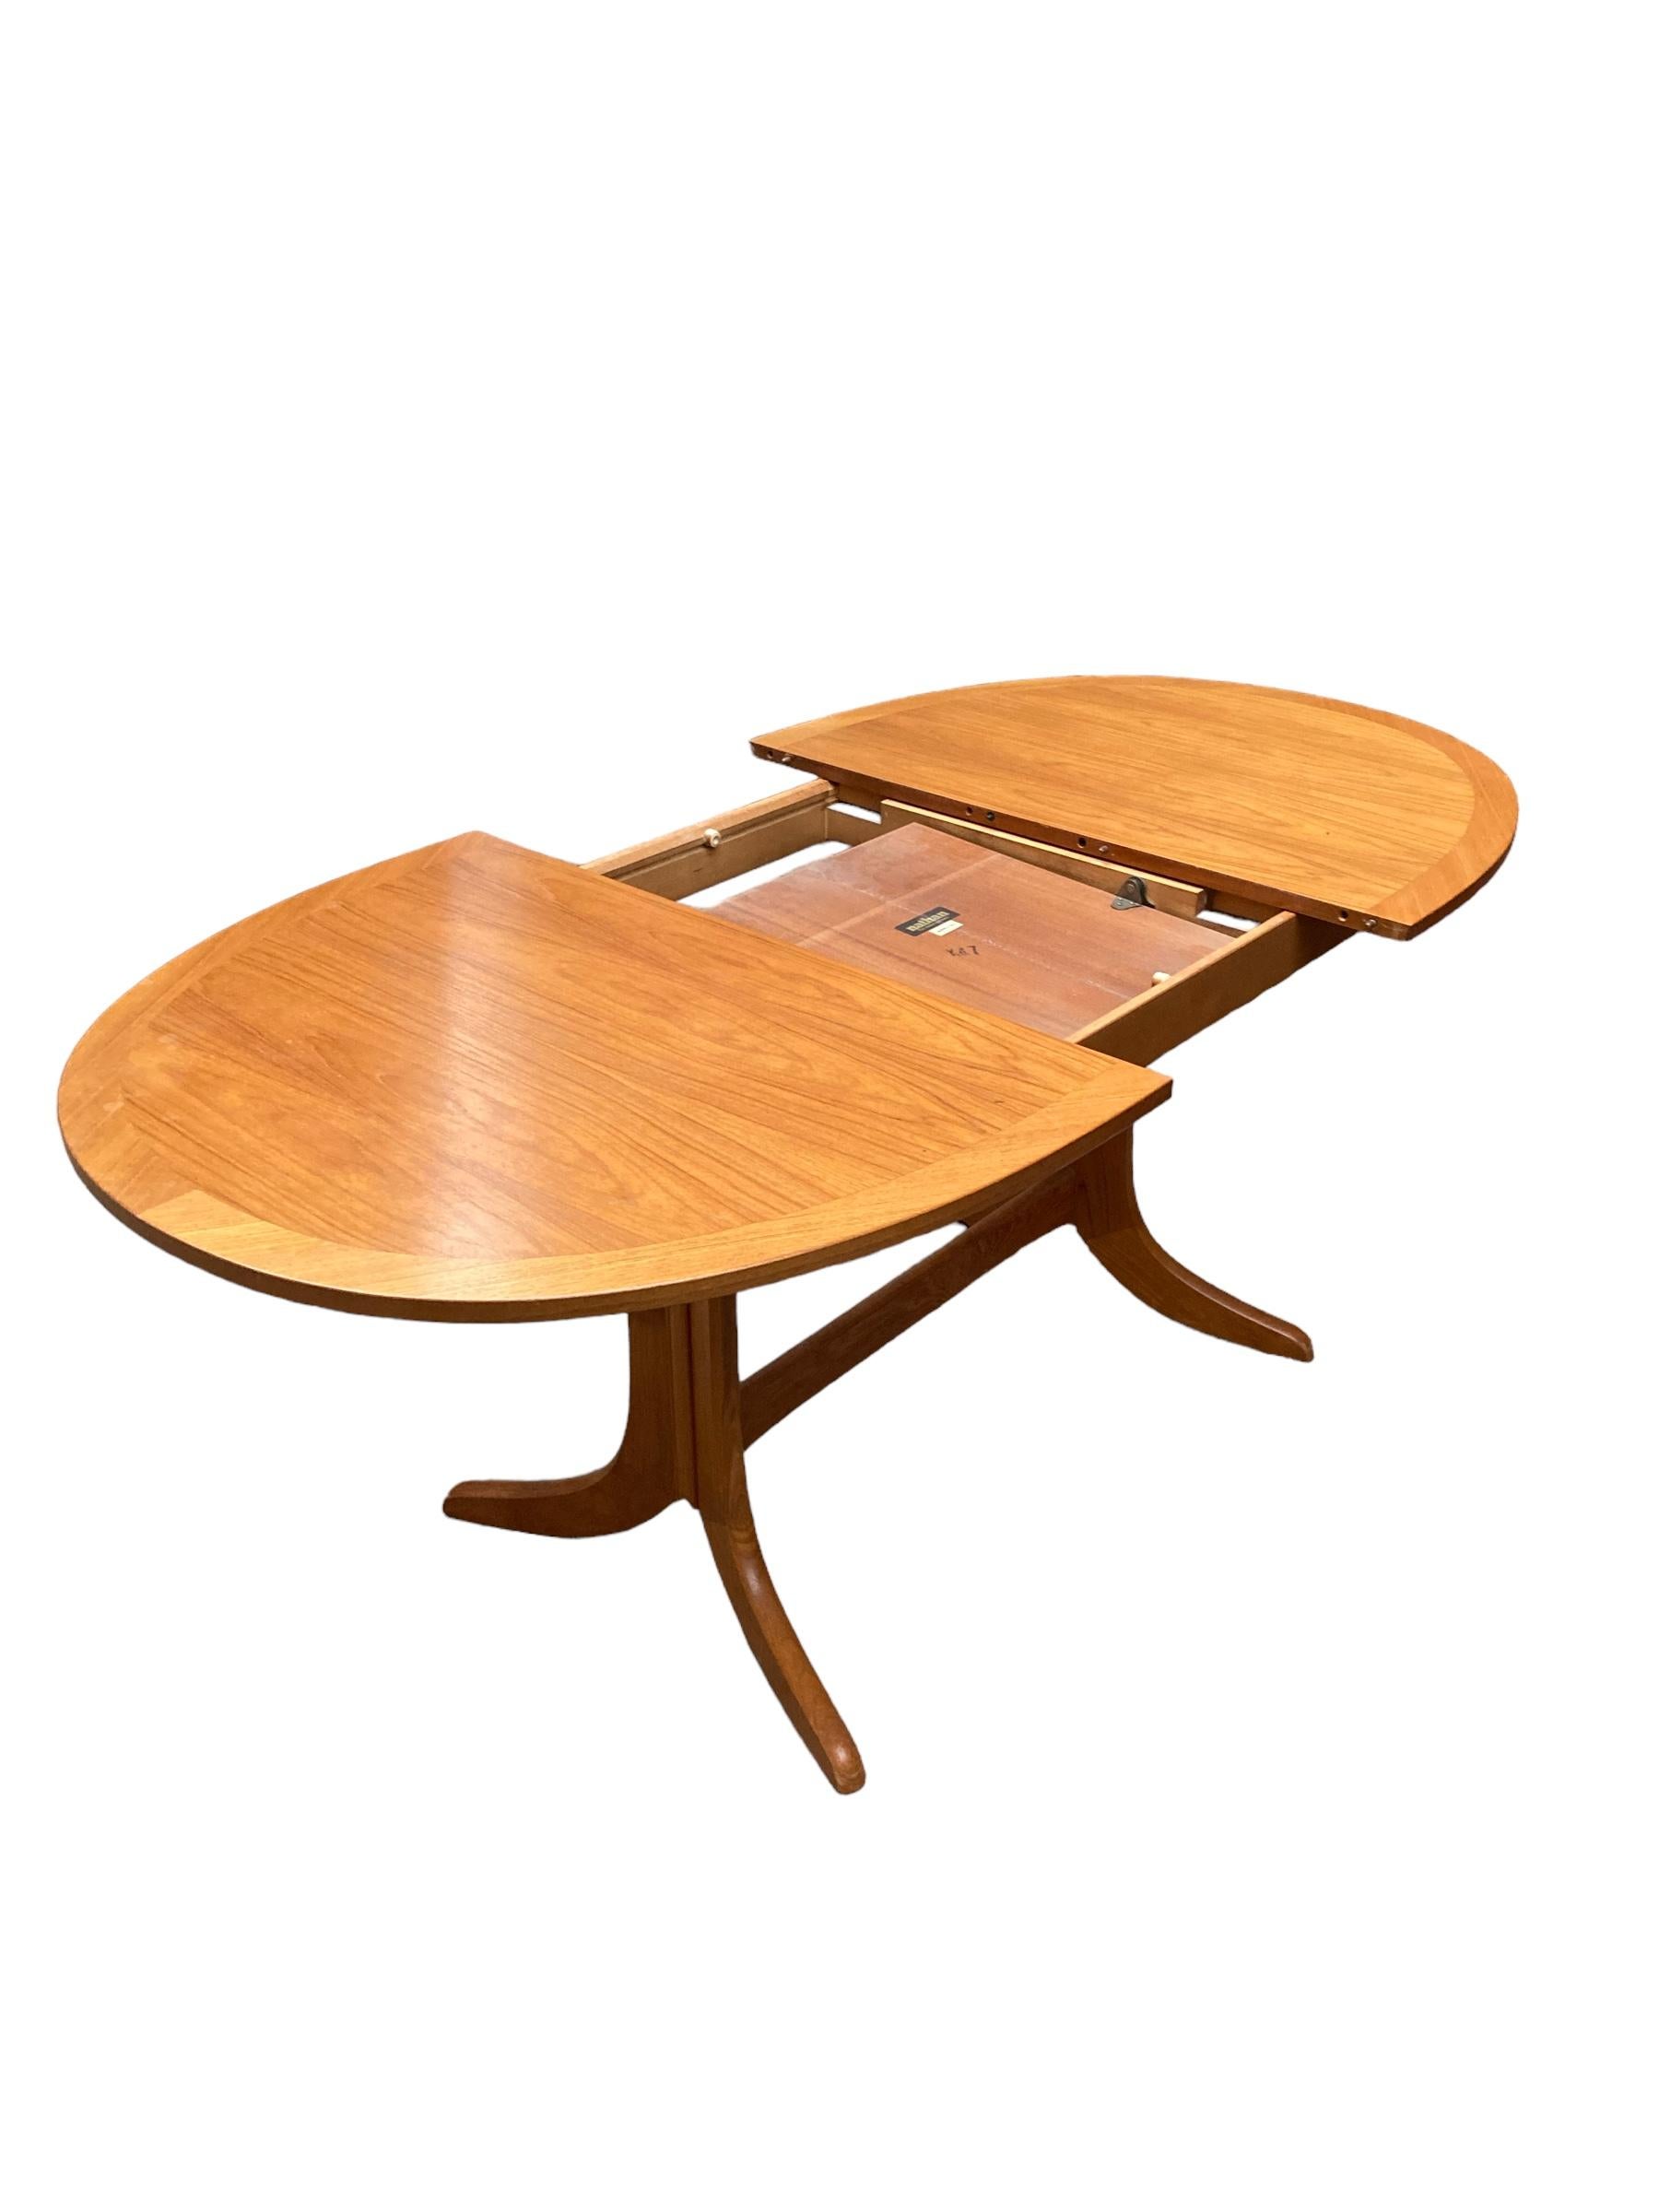 Teak Mid Century Extendable teak butterfly Oval dining table made by Nathan. For Sale